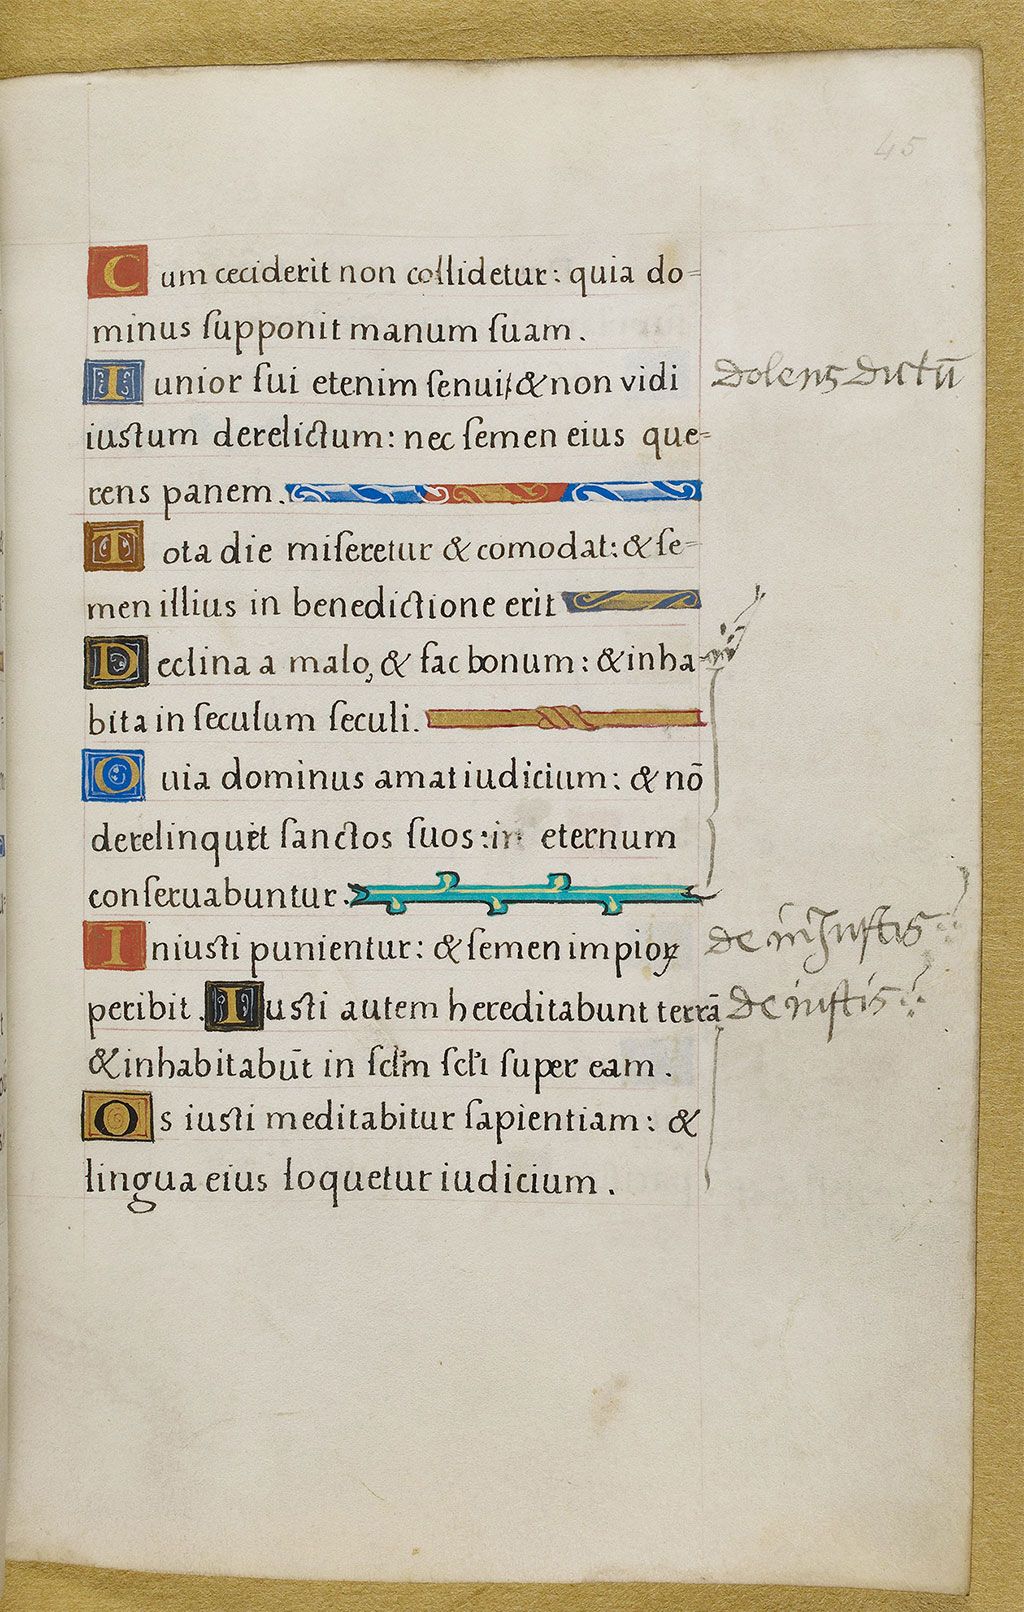 Page from the psalter, with handwritten annotations about the just and unjust